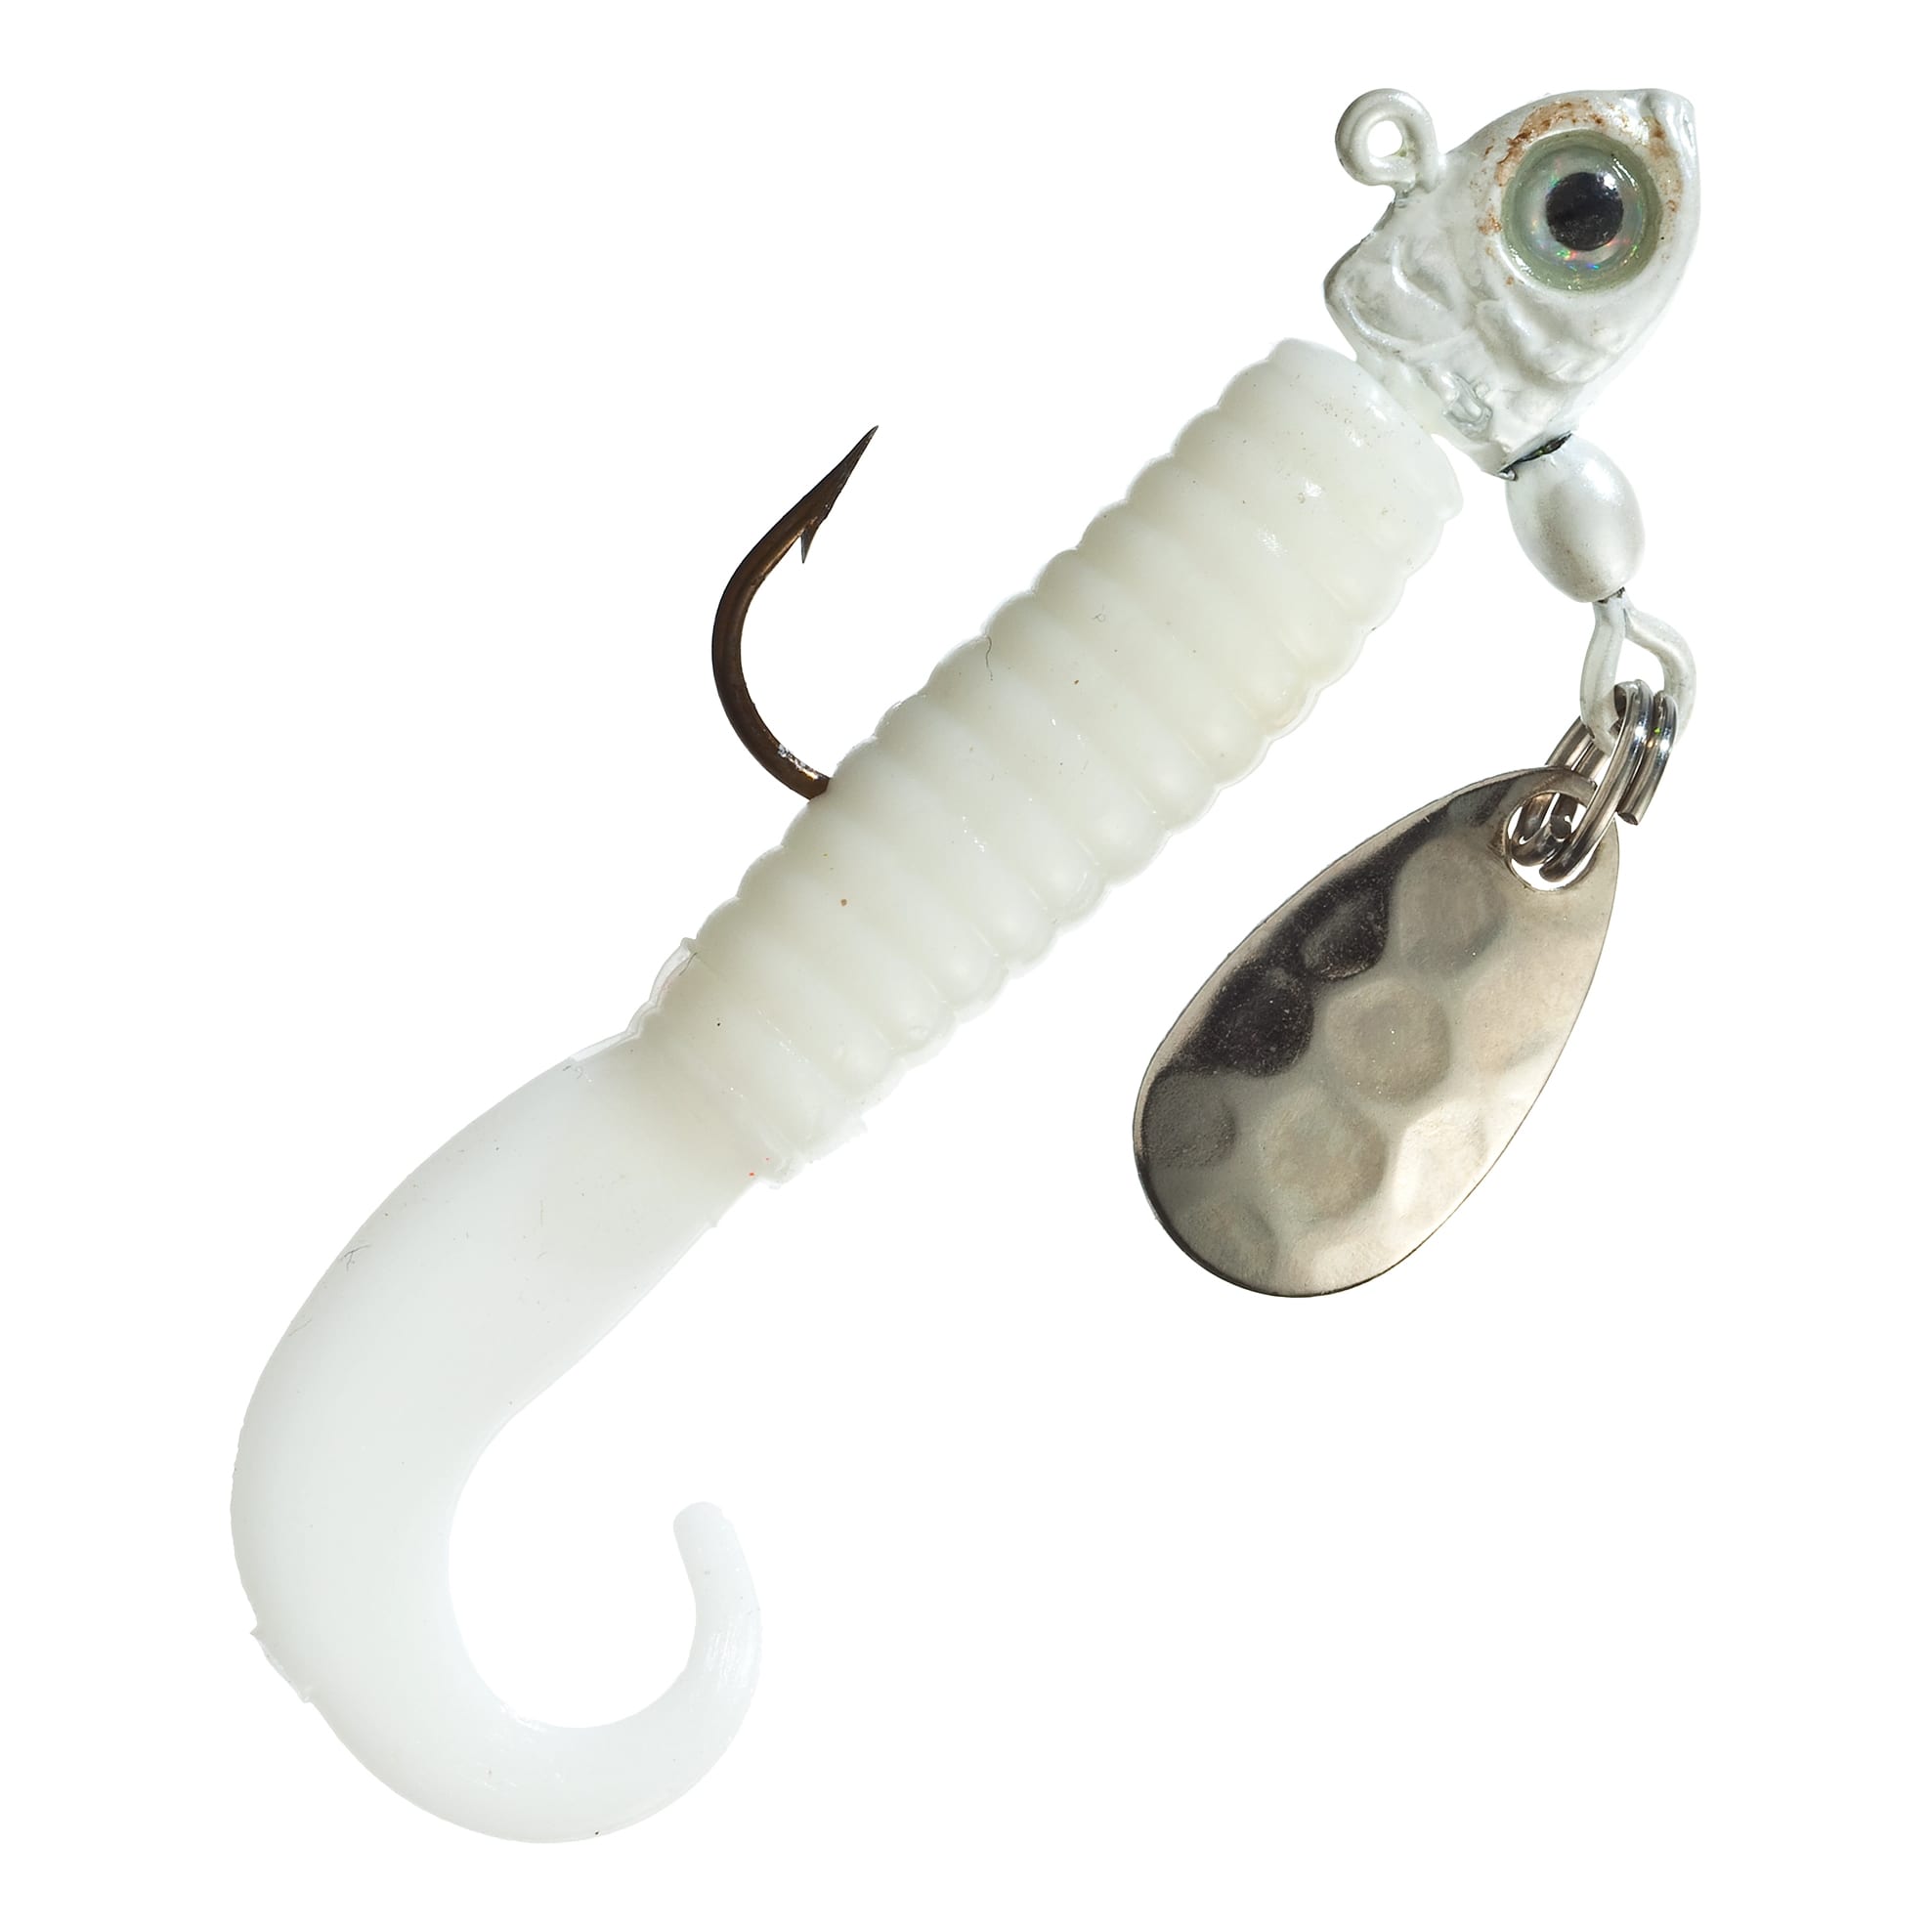 Bass Pro Shops® Curltail Stump Jumpers® Jig Baits - White